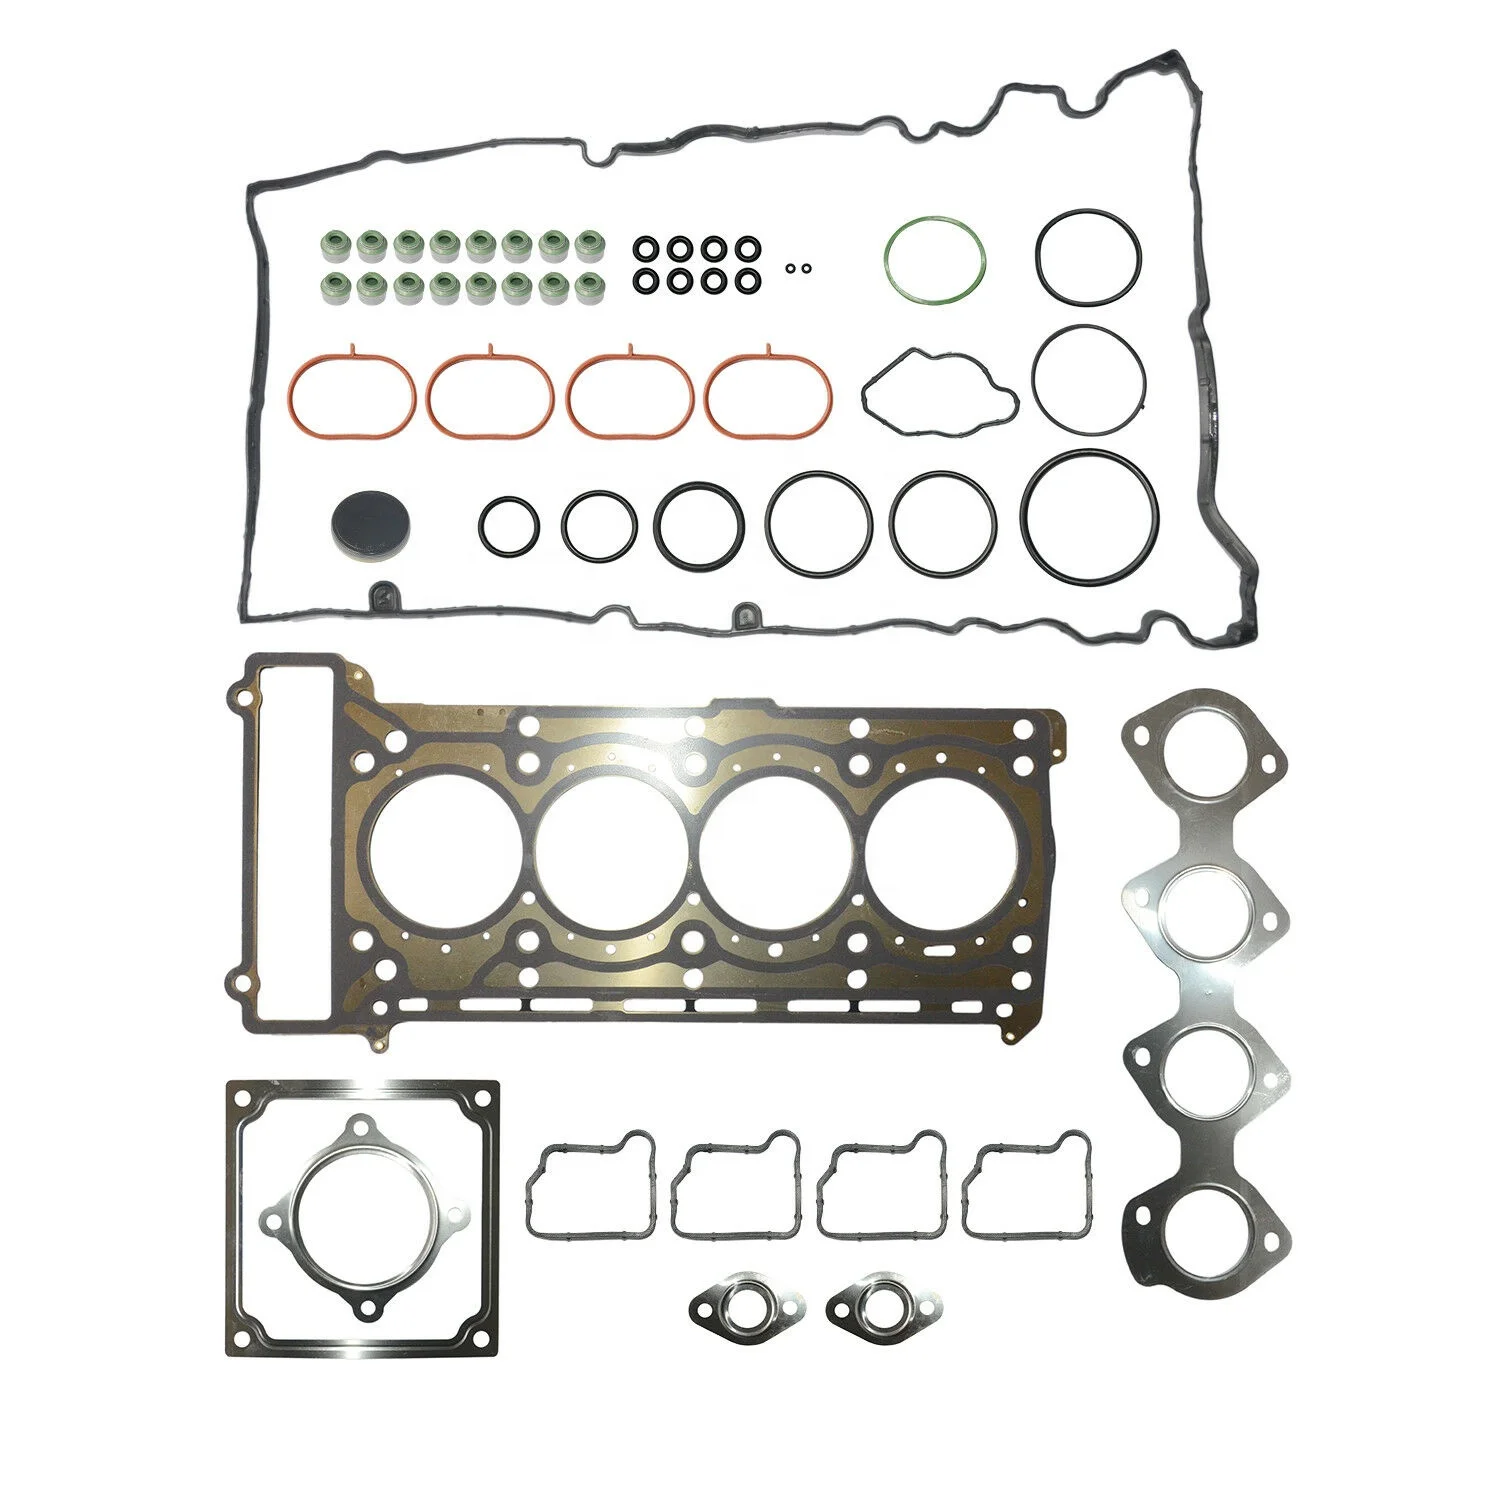 2710500611 Timing Chain Kit For Mercedes C-Class M271 W203 S203 CL203 1.6 1.8 633L 